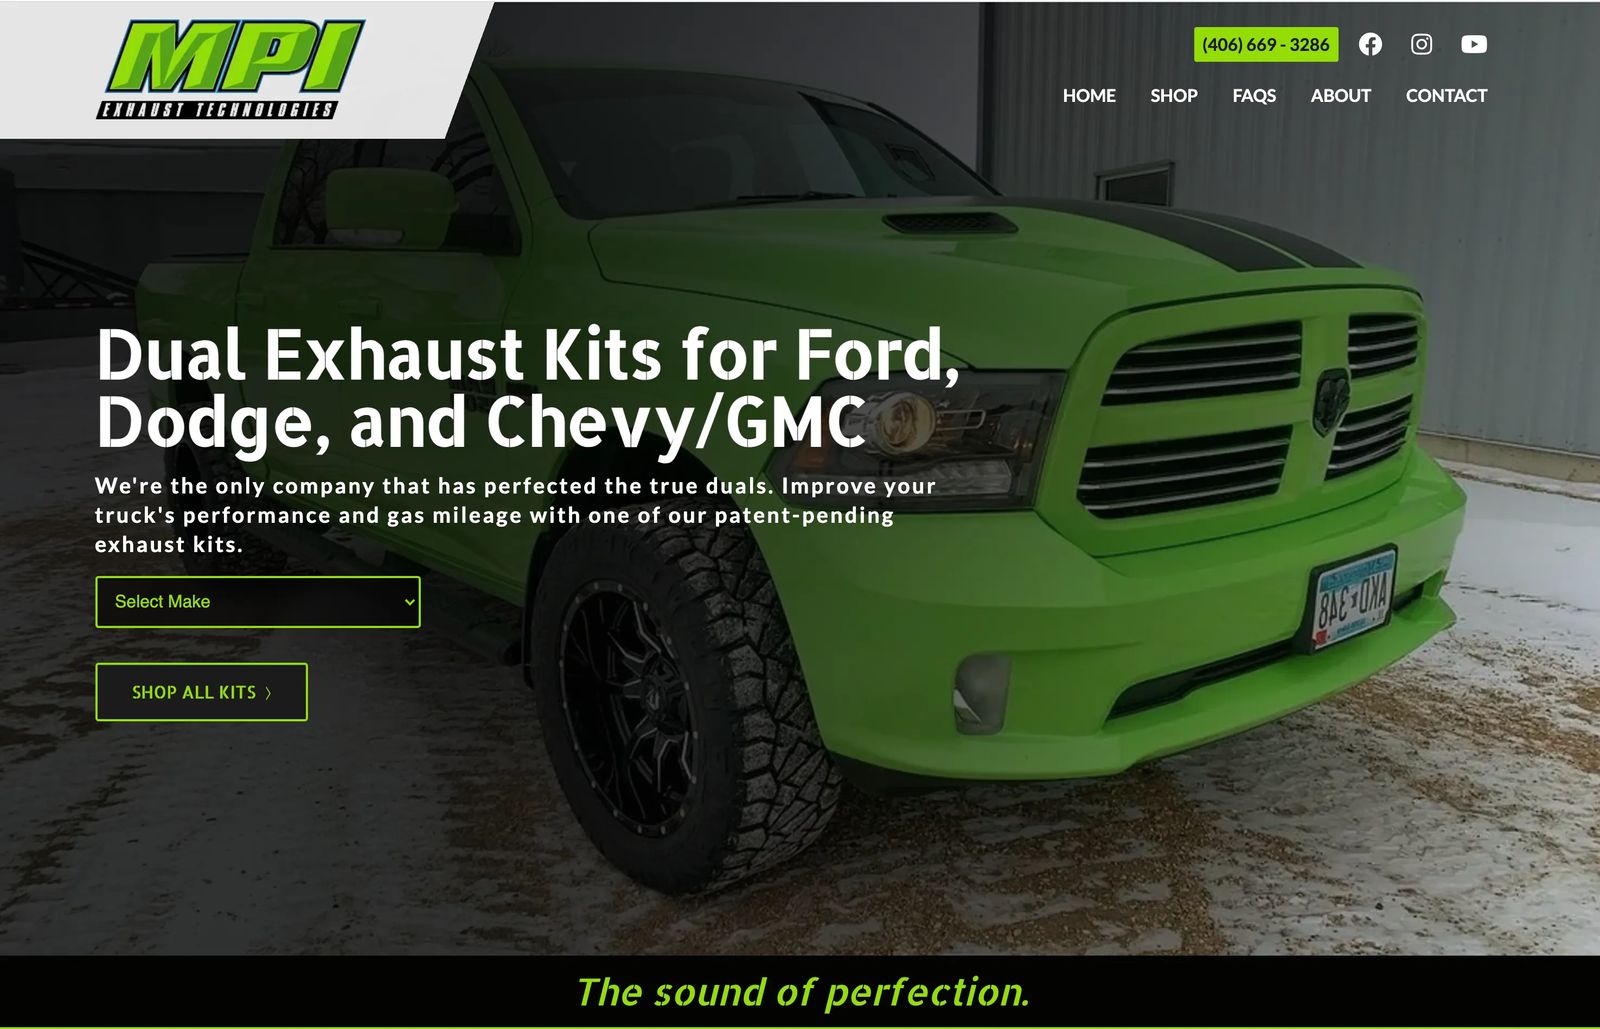 key benefit statement example on MPI Exhaust website